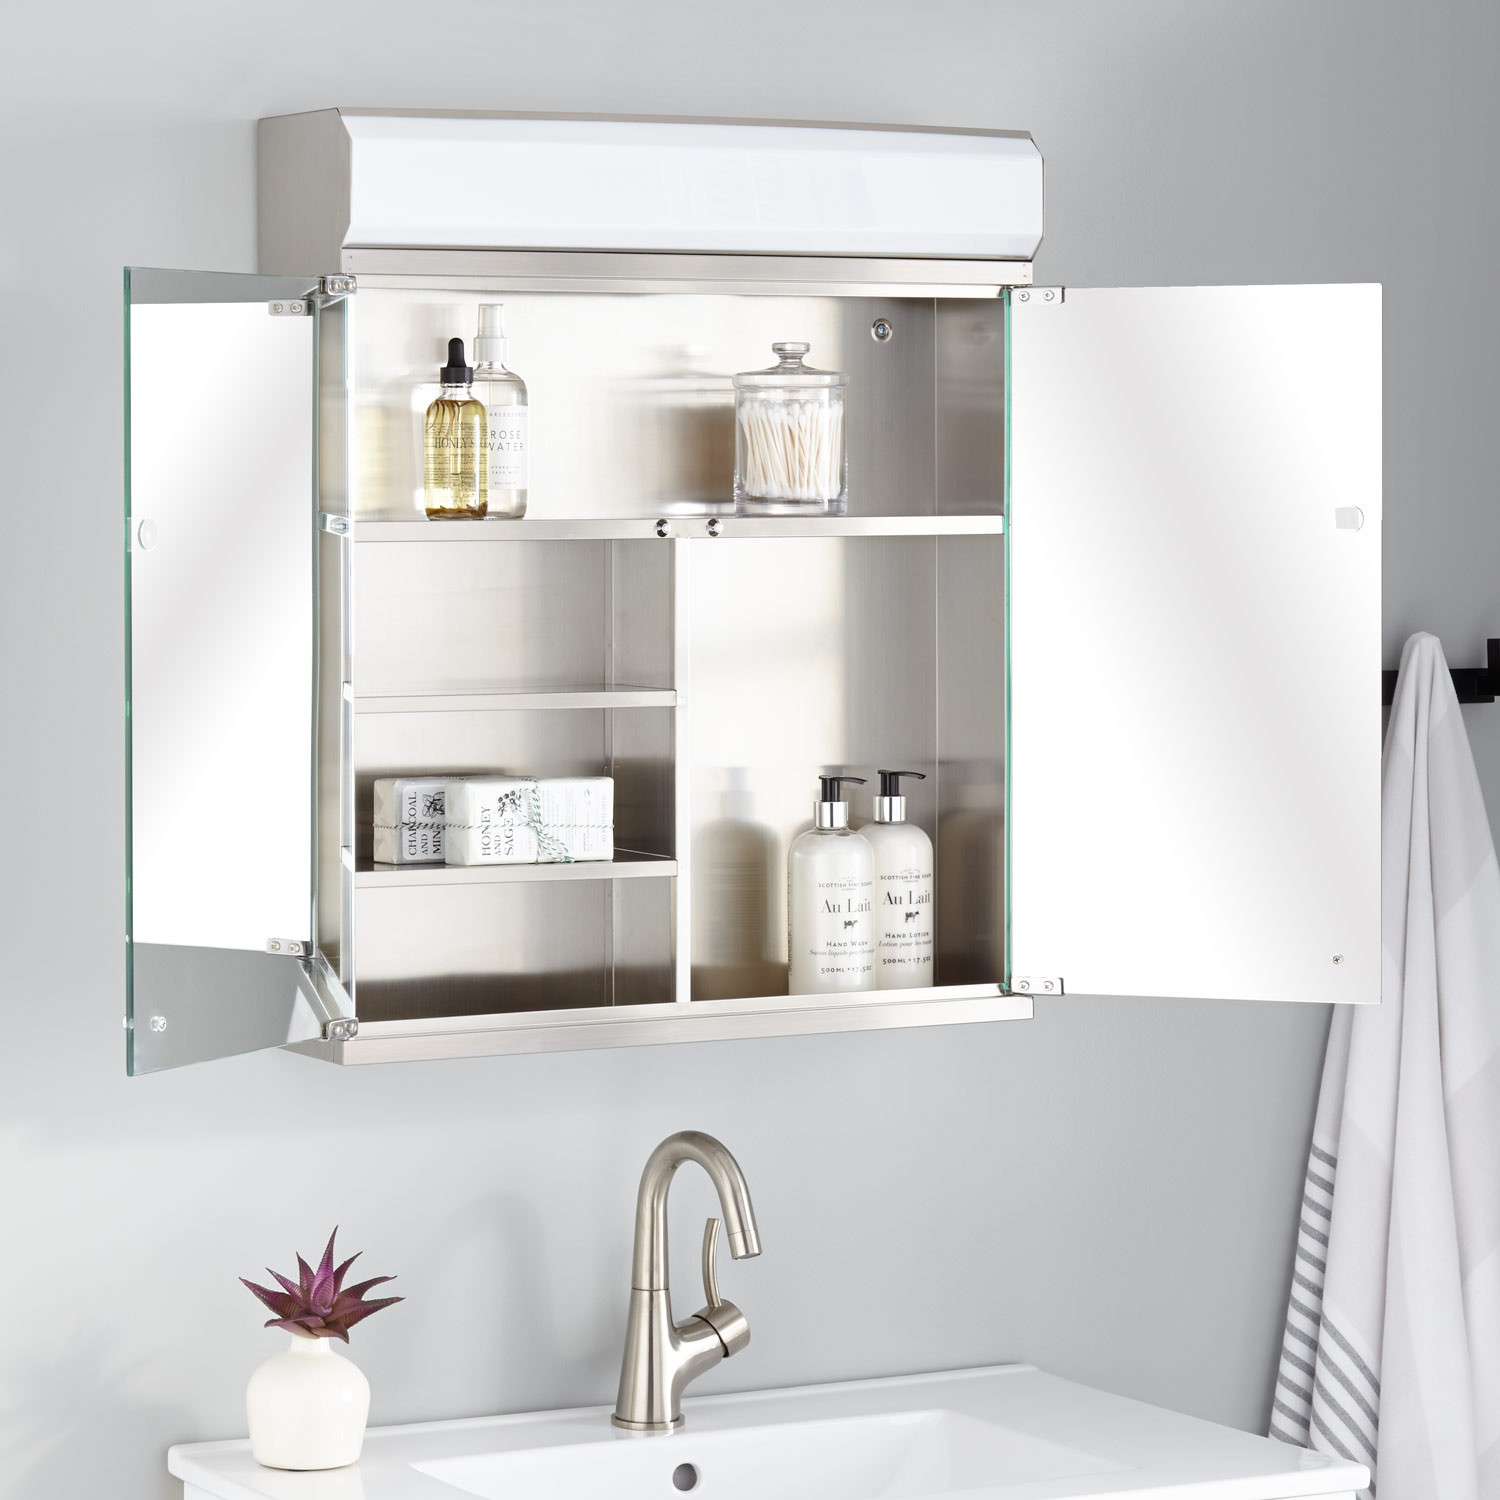 Bathroom Medicine Cabinets With Lights
 Delview Stainless Steel Medicine Cabinet with Lighted